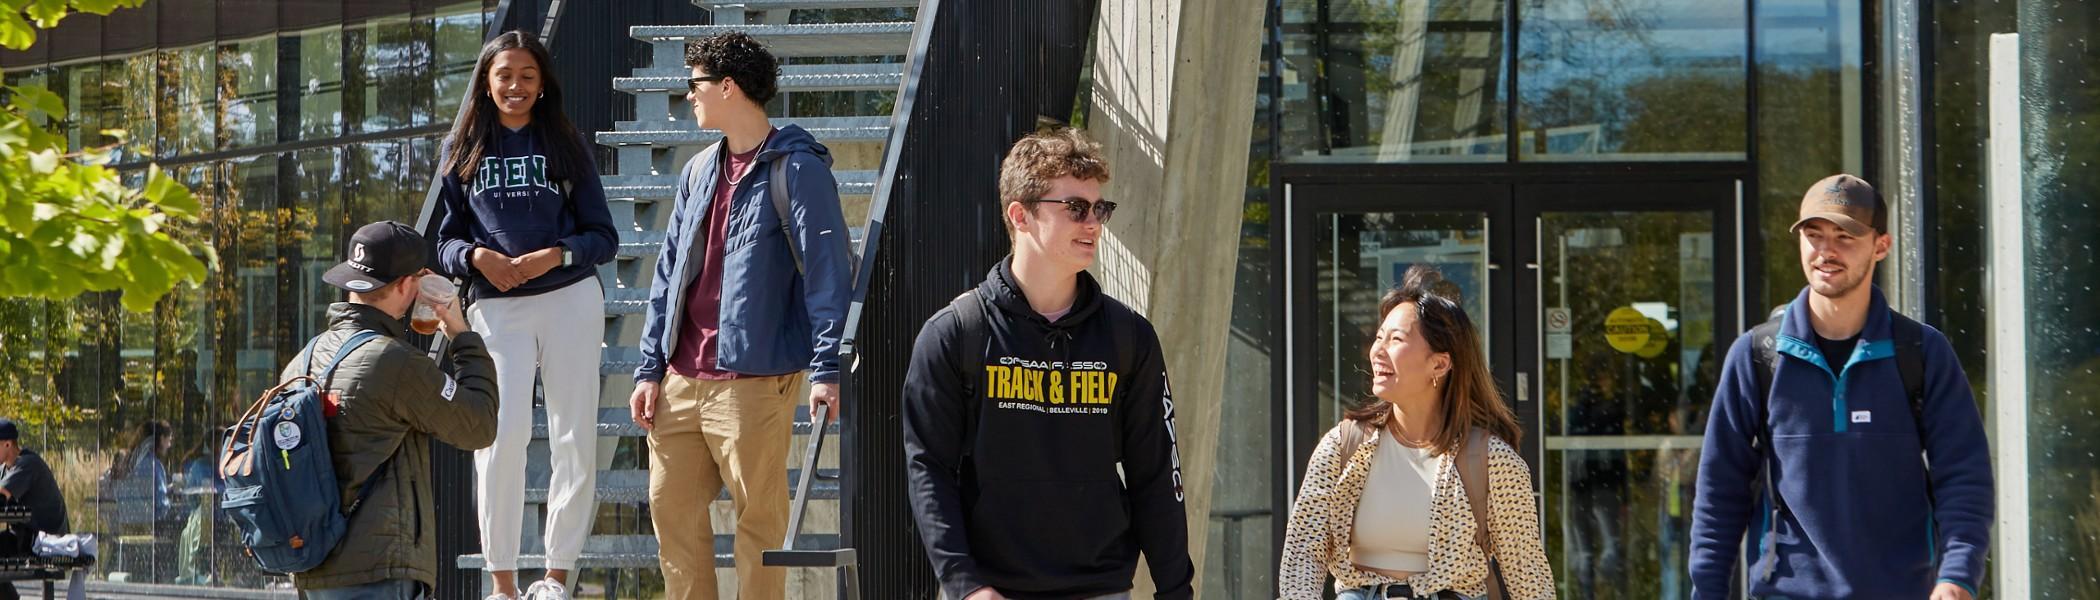 A group of Trent students walking together on campus